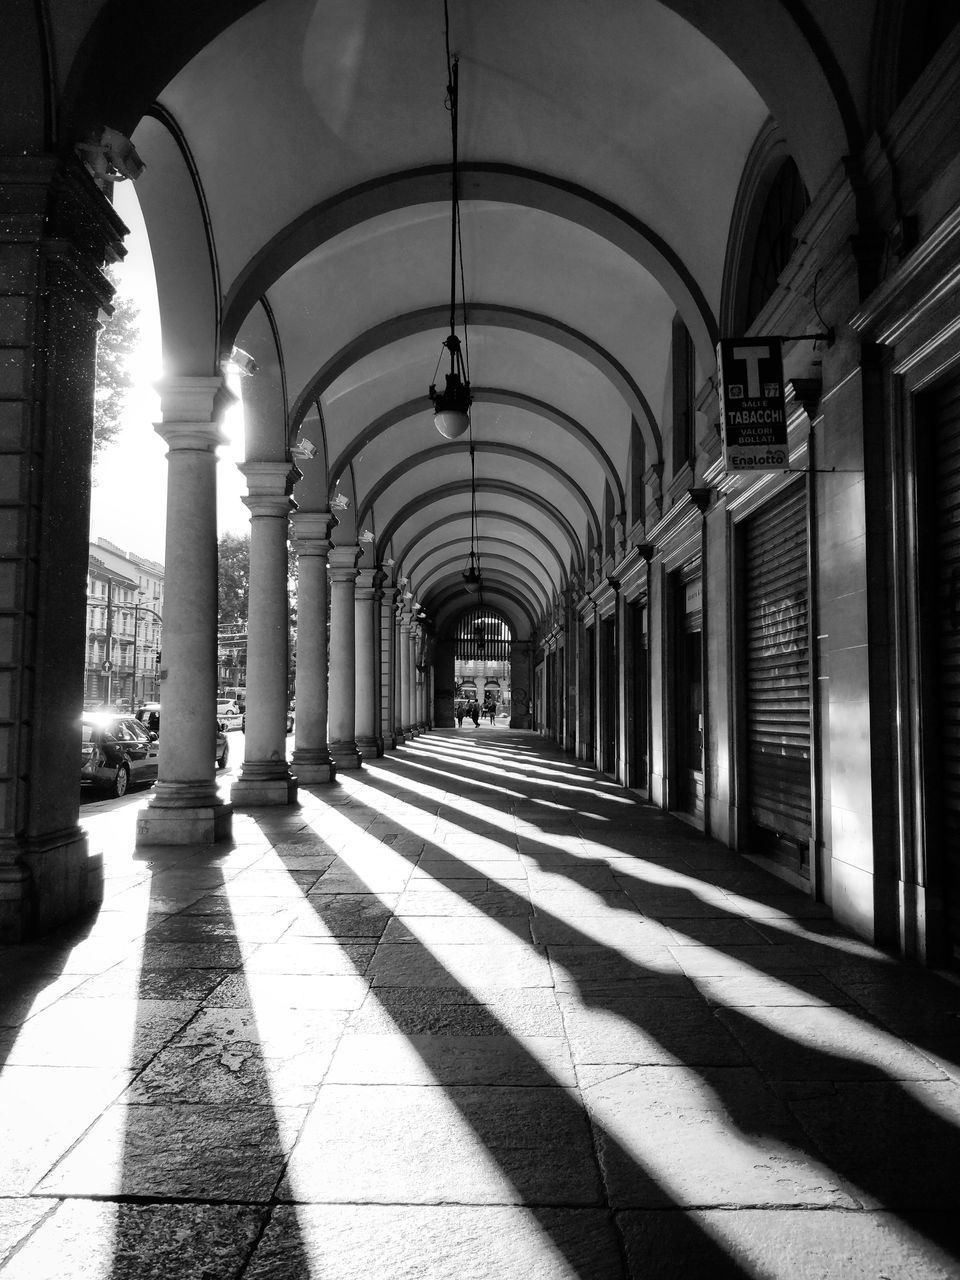 VIEW OF CORRIDOR OF BUILDING WITH COLONNADE